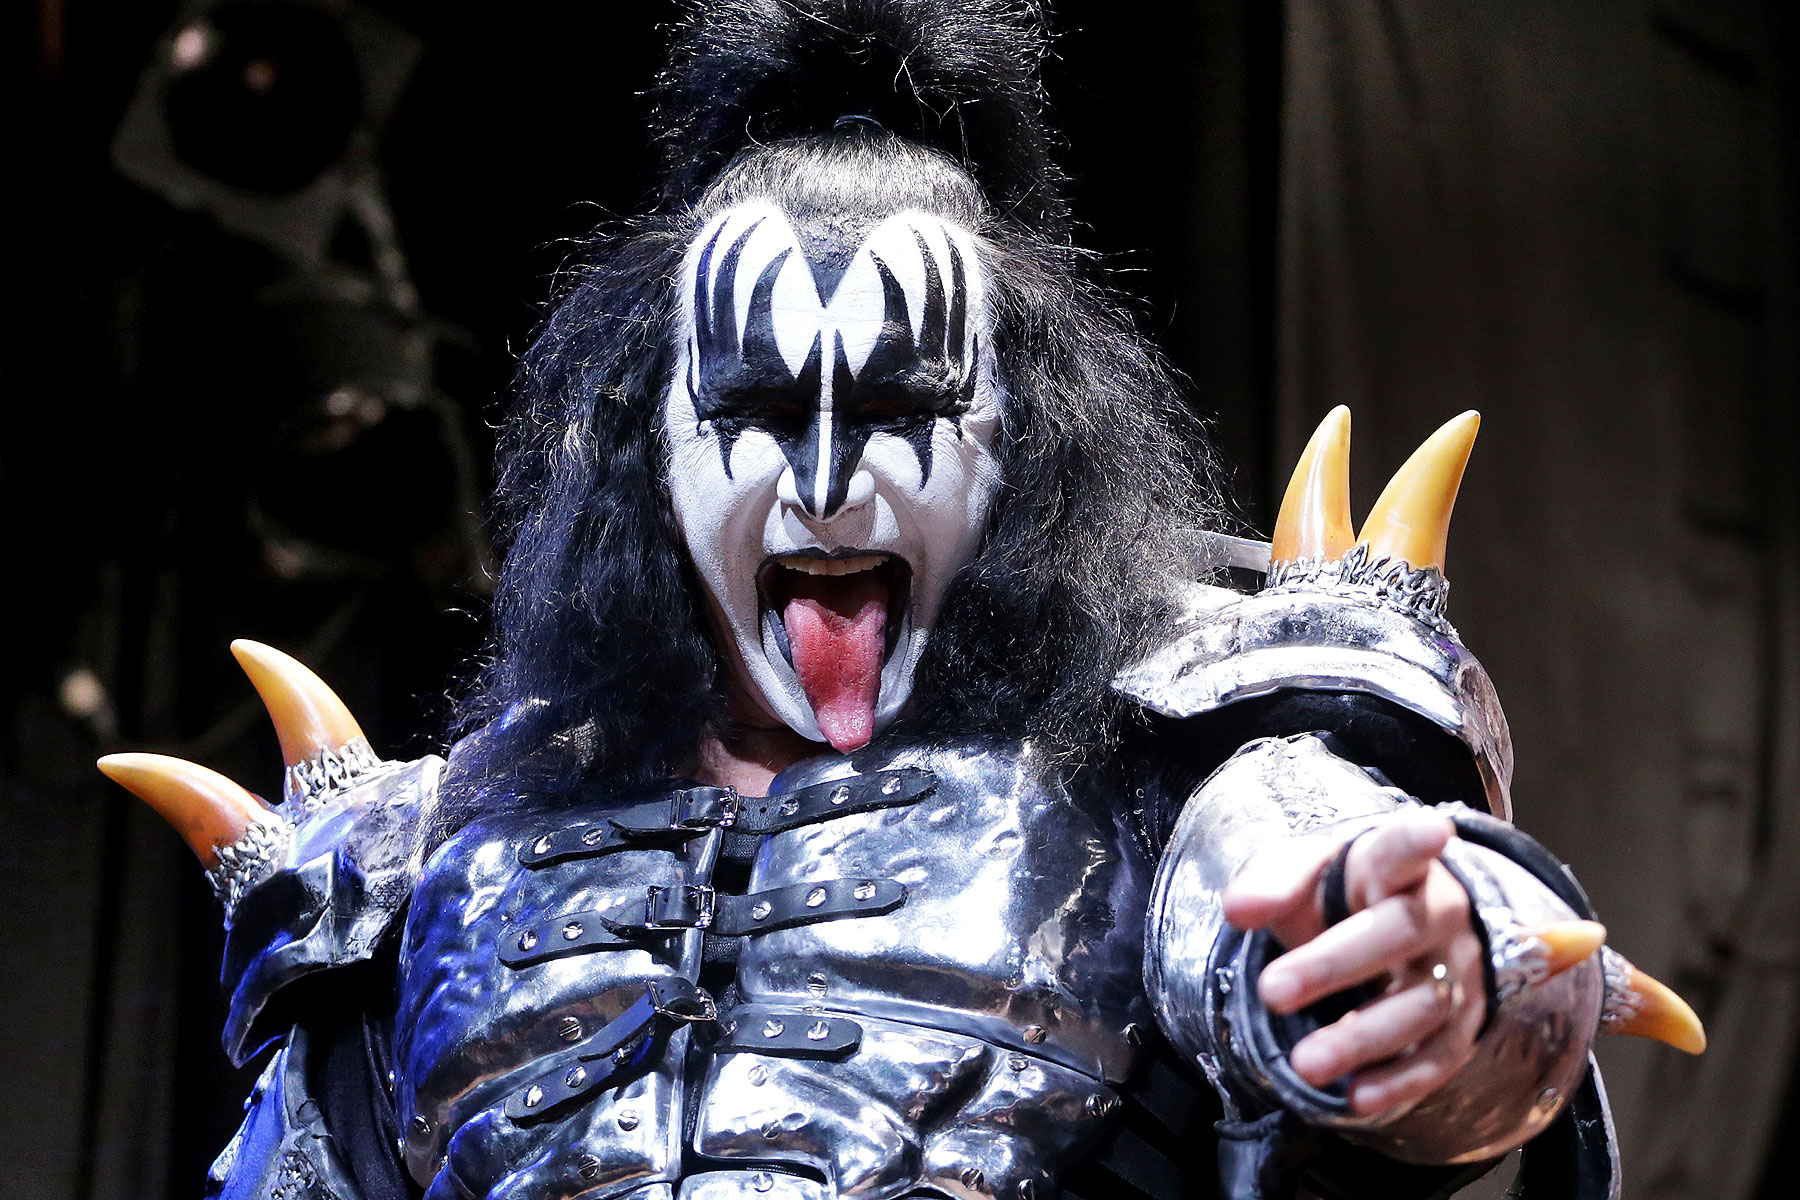 Gene Simmons, a member of the rock band Kiss, poses during an announcement that Kiss and Def Leppard will team up this summer for a 42-city North American tour, at the House of Blues in West Hollywood, California March 17, 2014 (Jonathan Alcorn—Reuters)